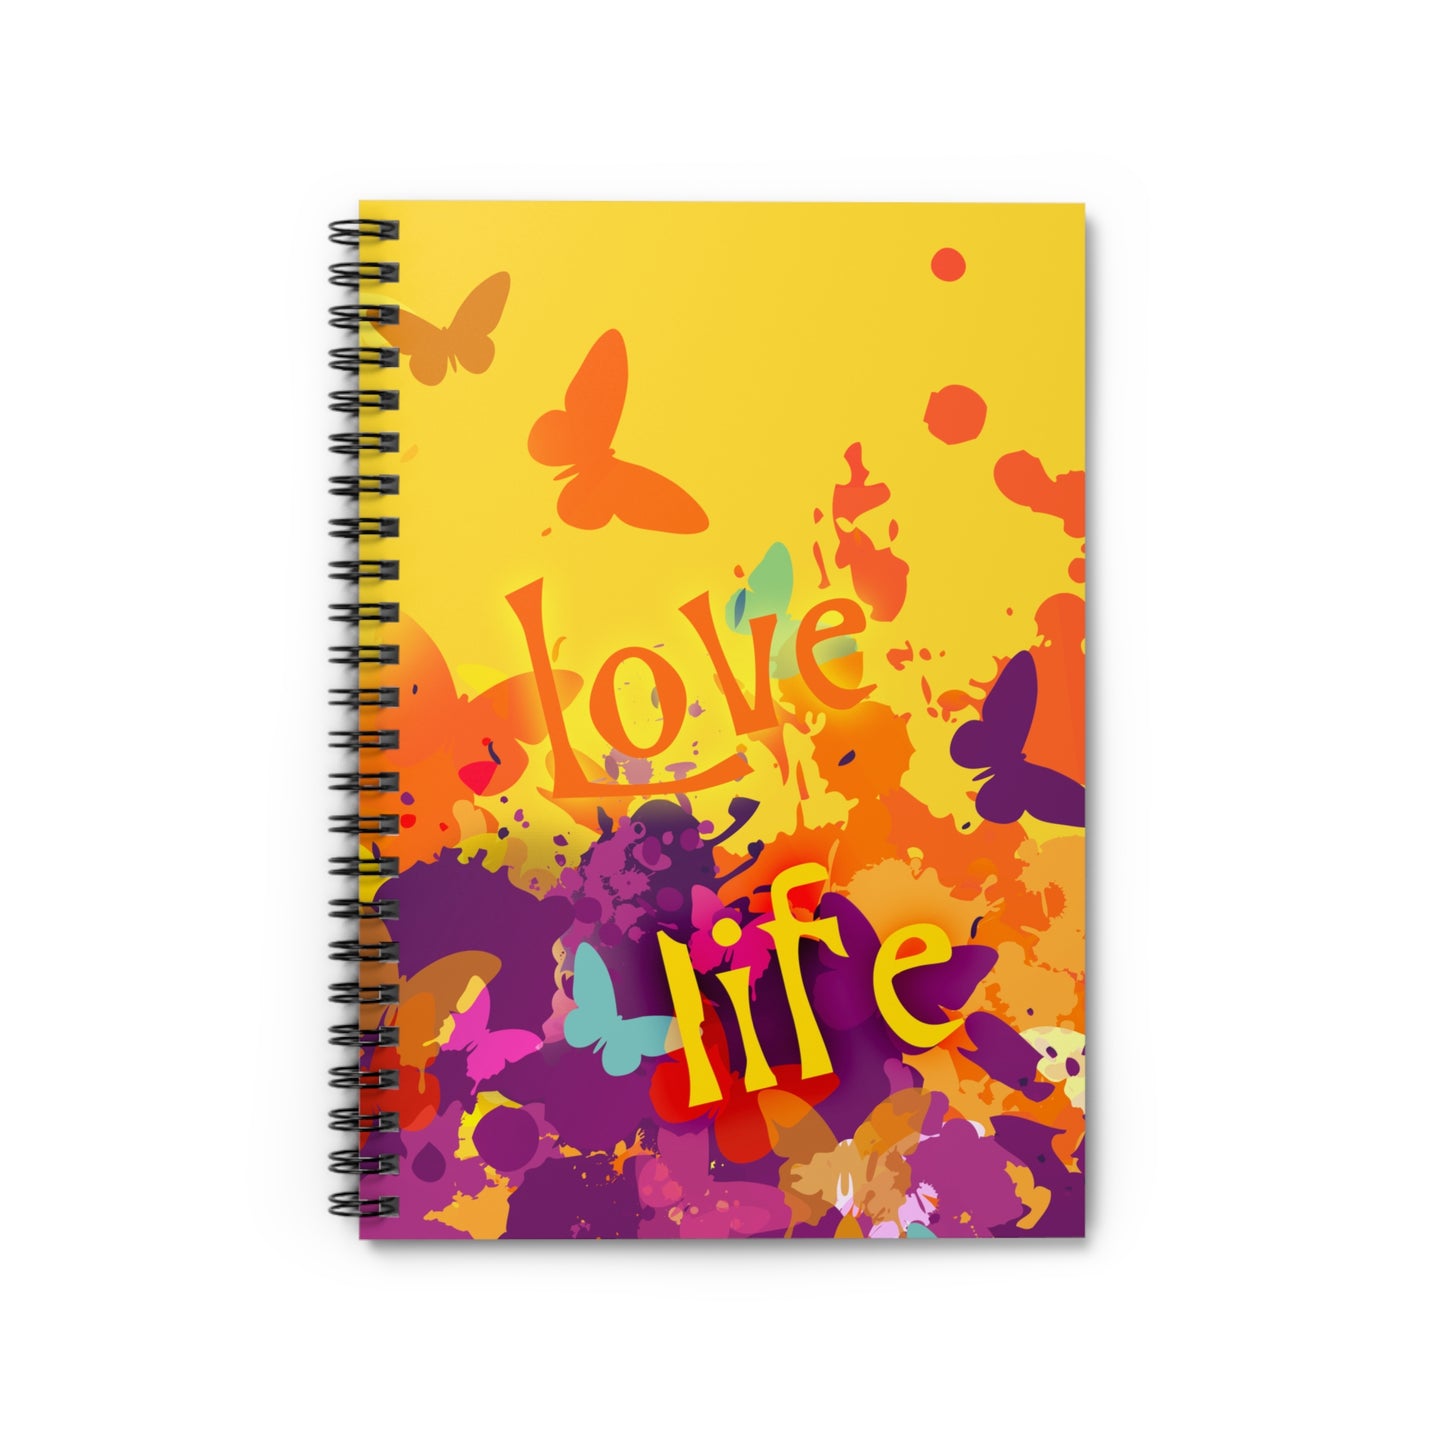 Love Life - Spiral Notebook - Ruled Line